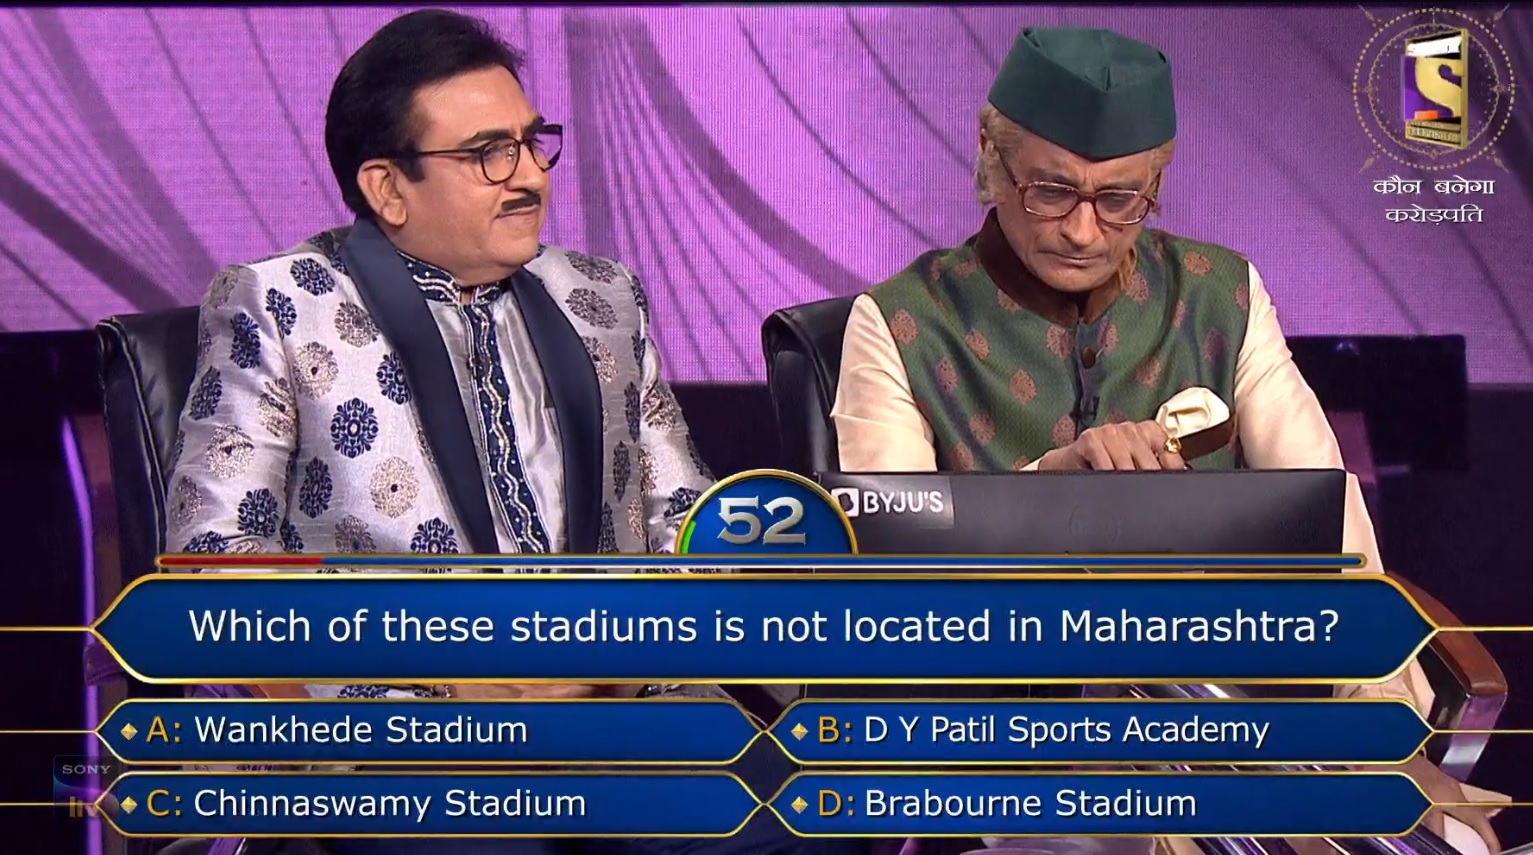 Ques : Which of these stadiums is not located in Maharashtra?